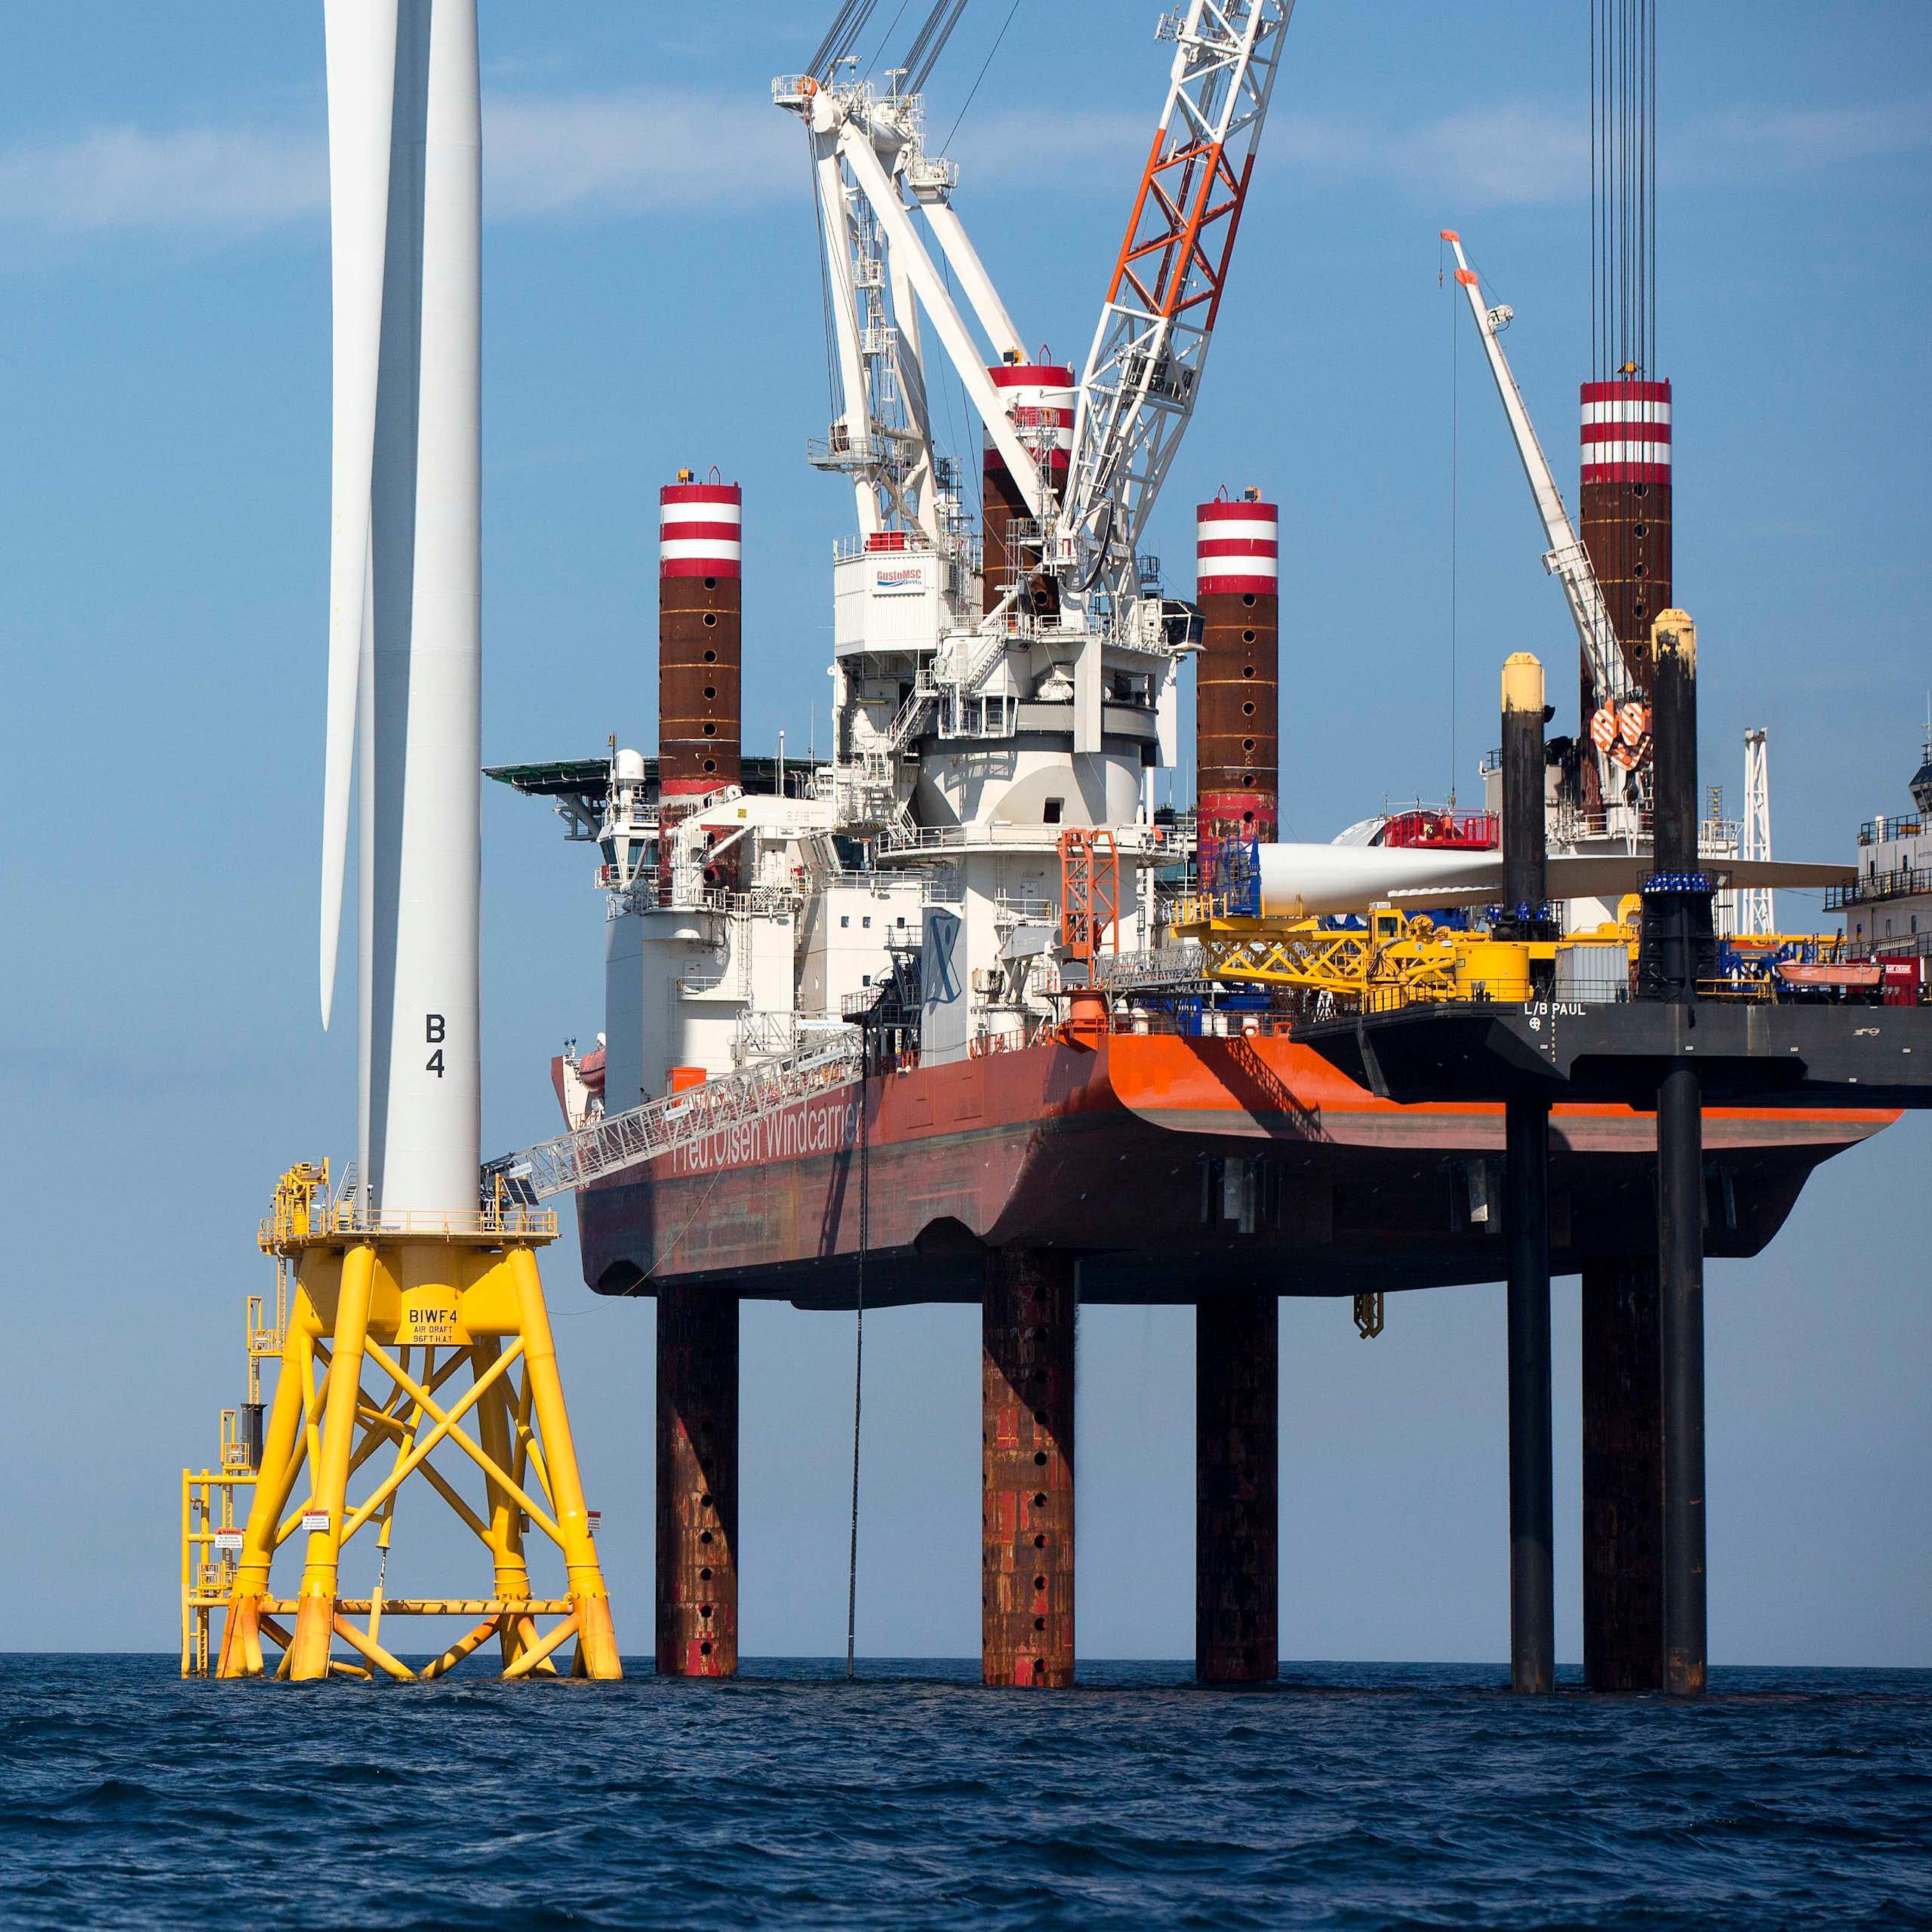 A large ship on stilts that stabilize it uses cranes to build giant offshore wind turbines and their posts.